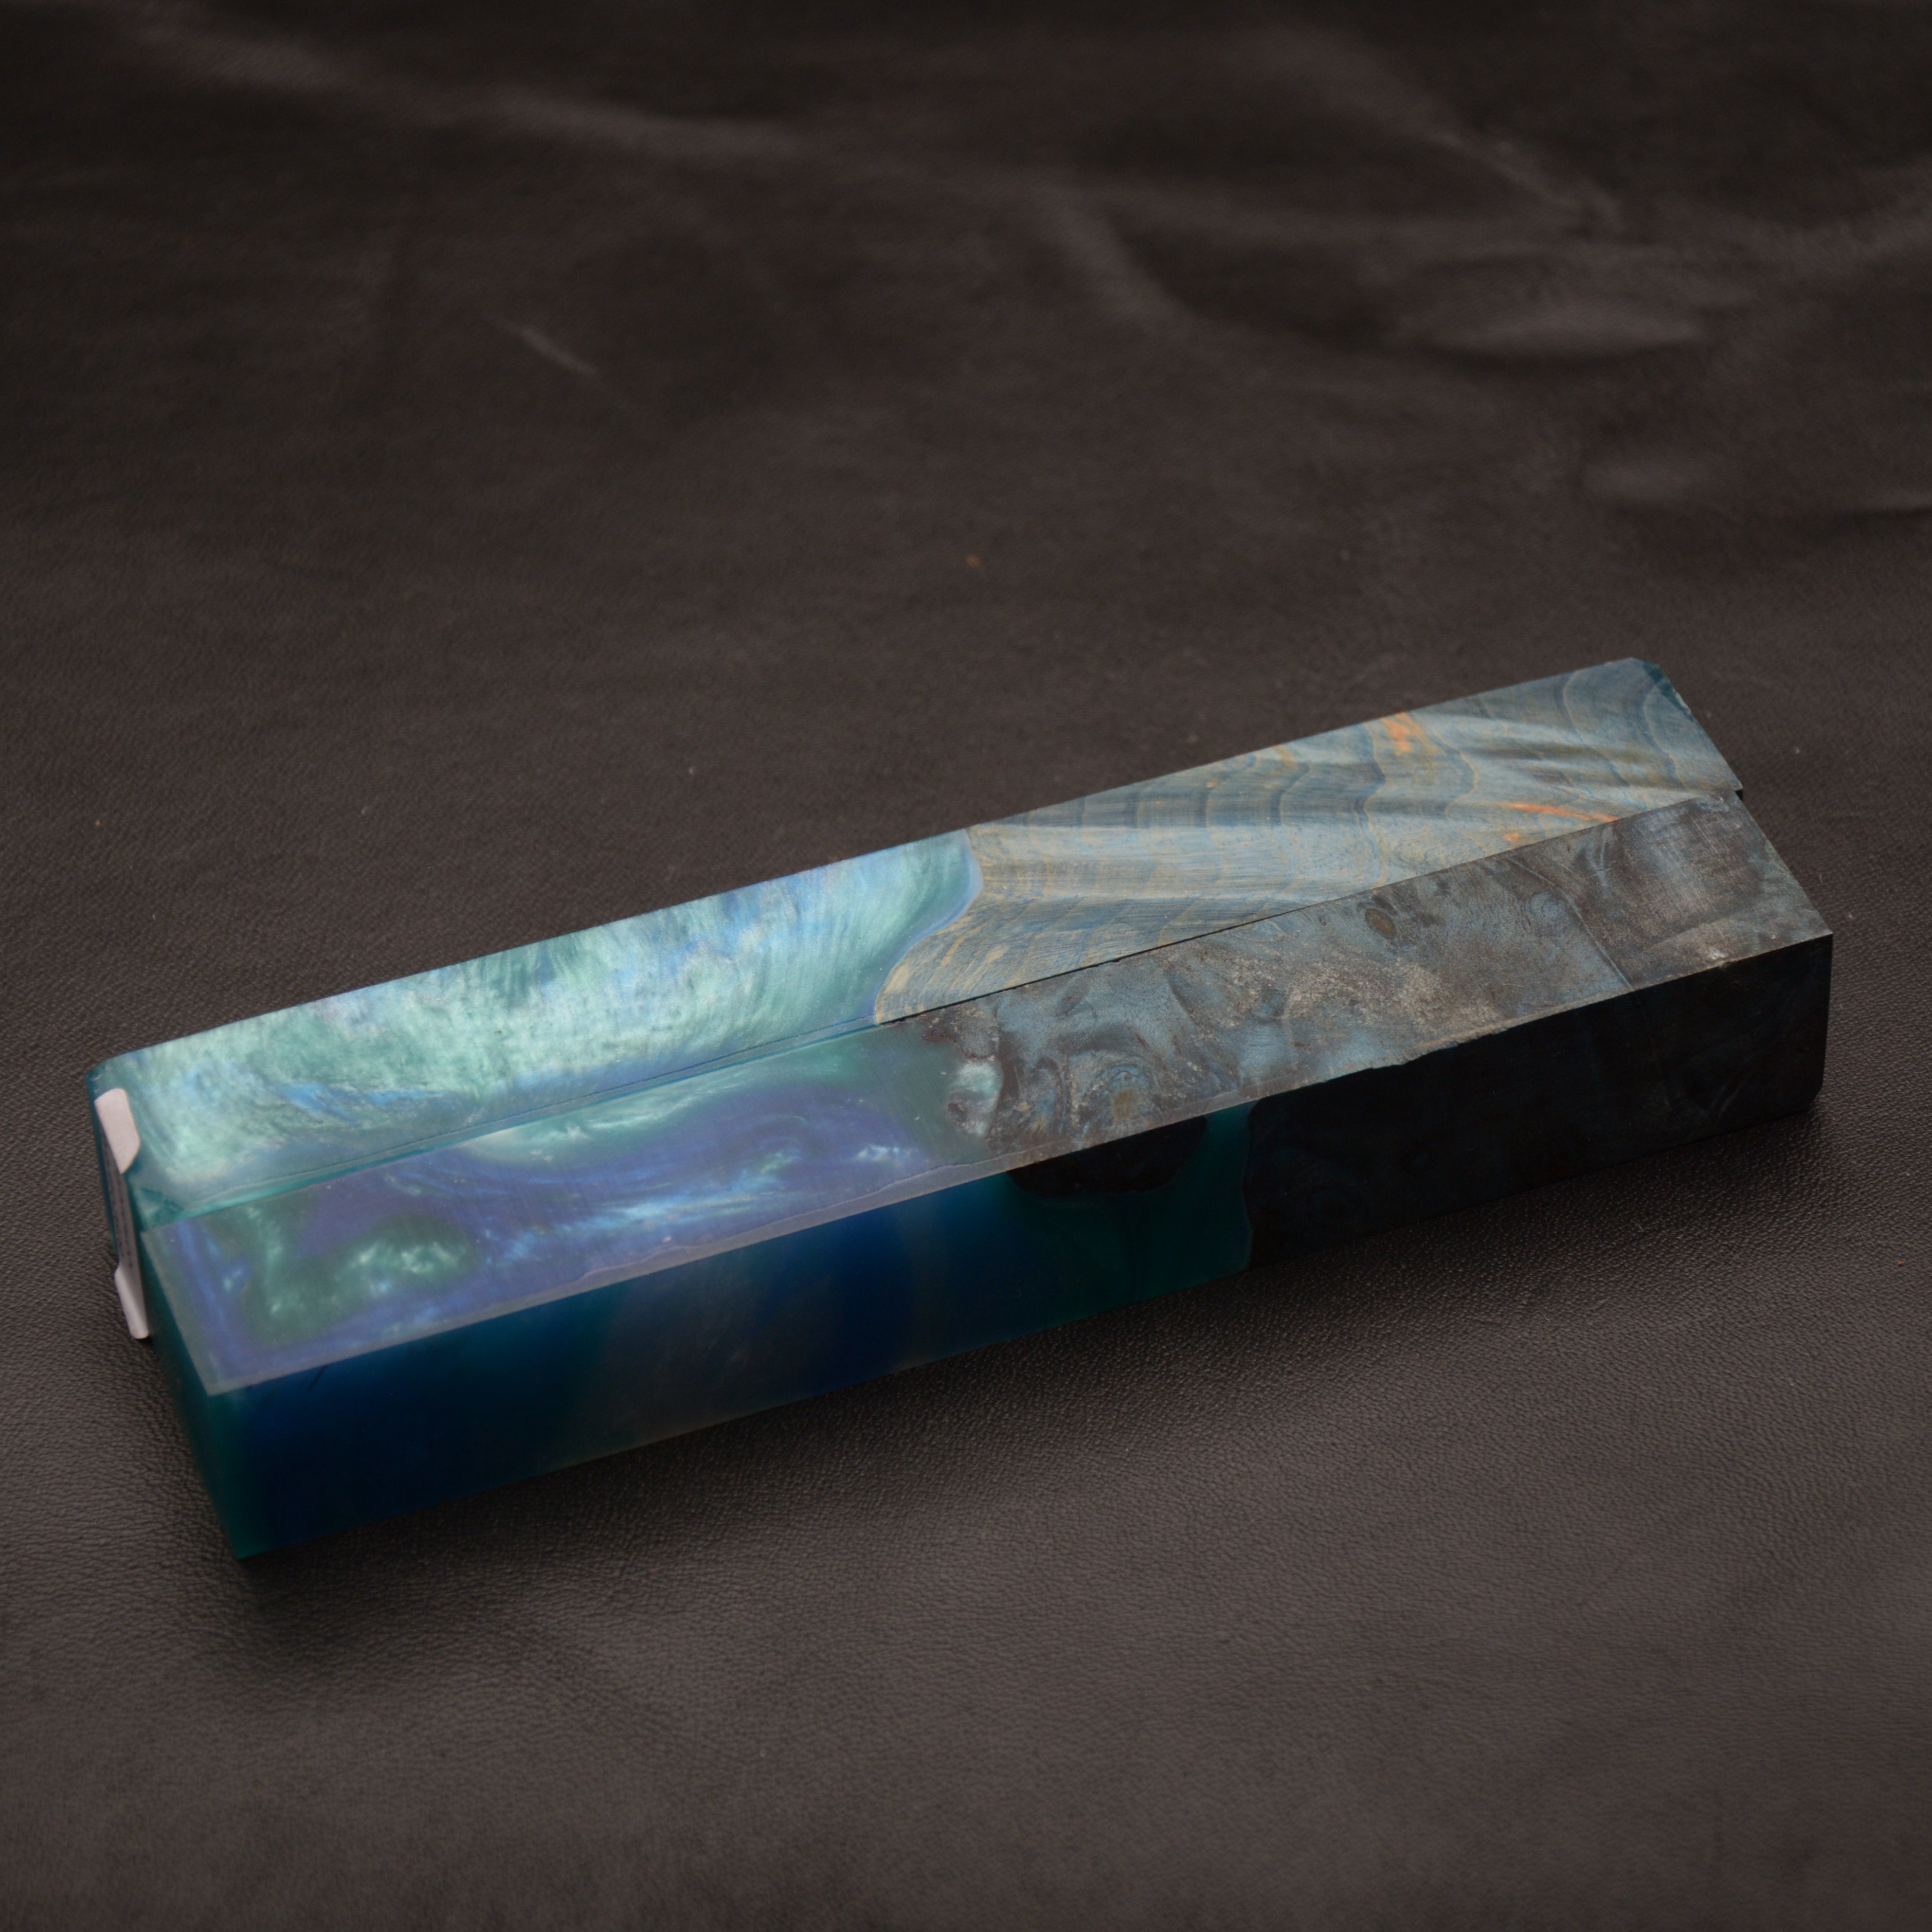 Hybrid Wood - Blue Dyed Box Elder Maple Burl with Blue and Green resin